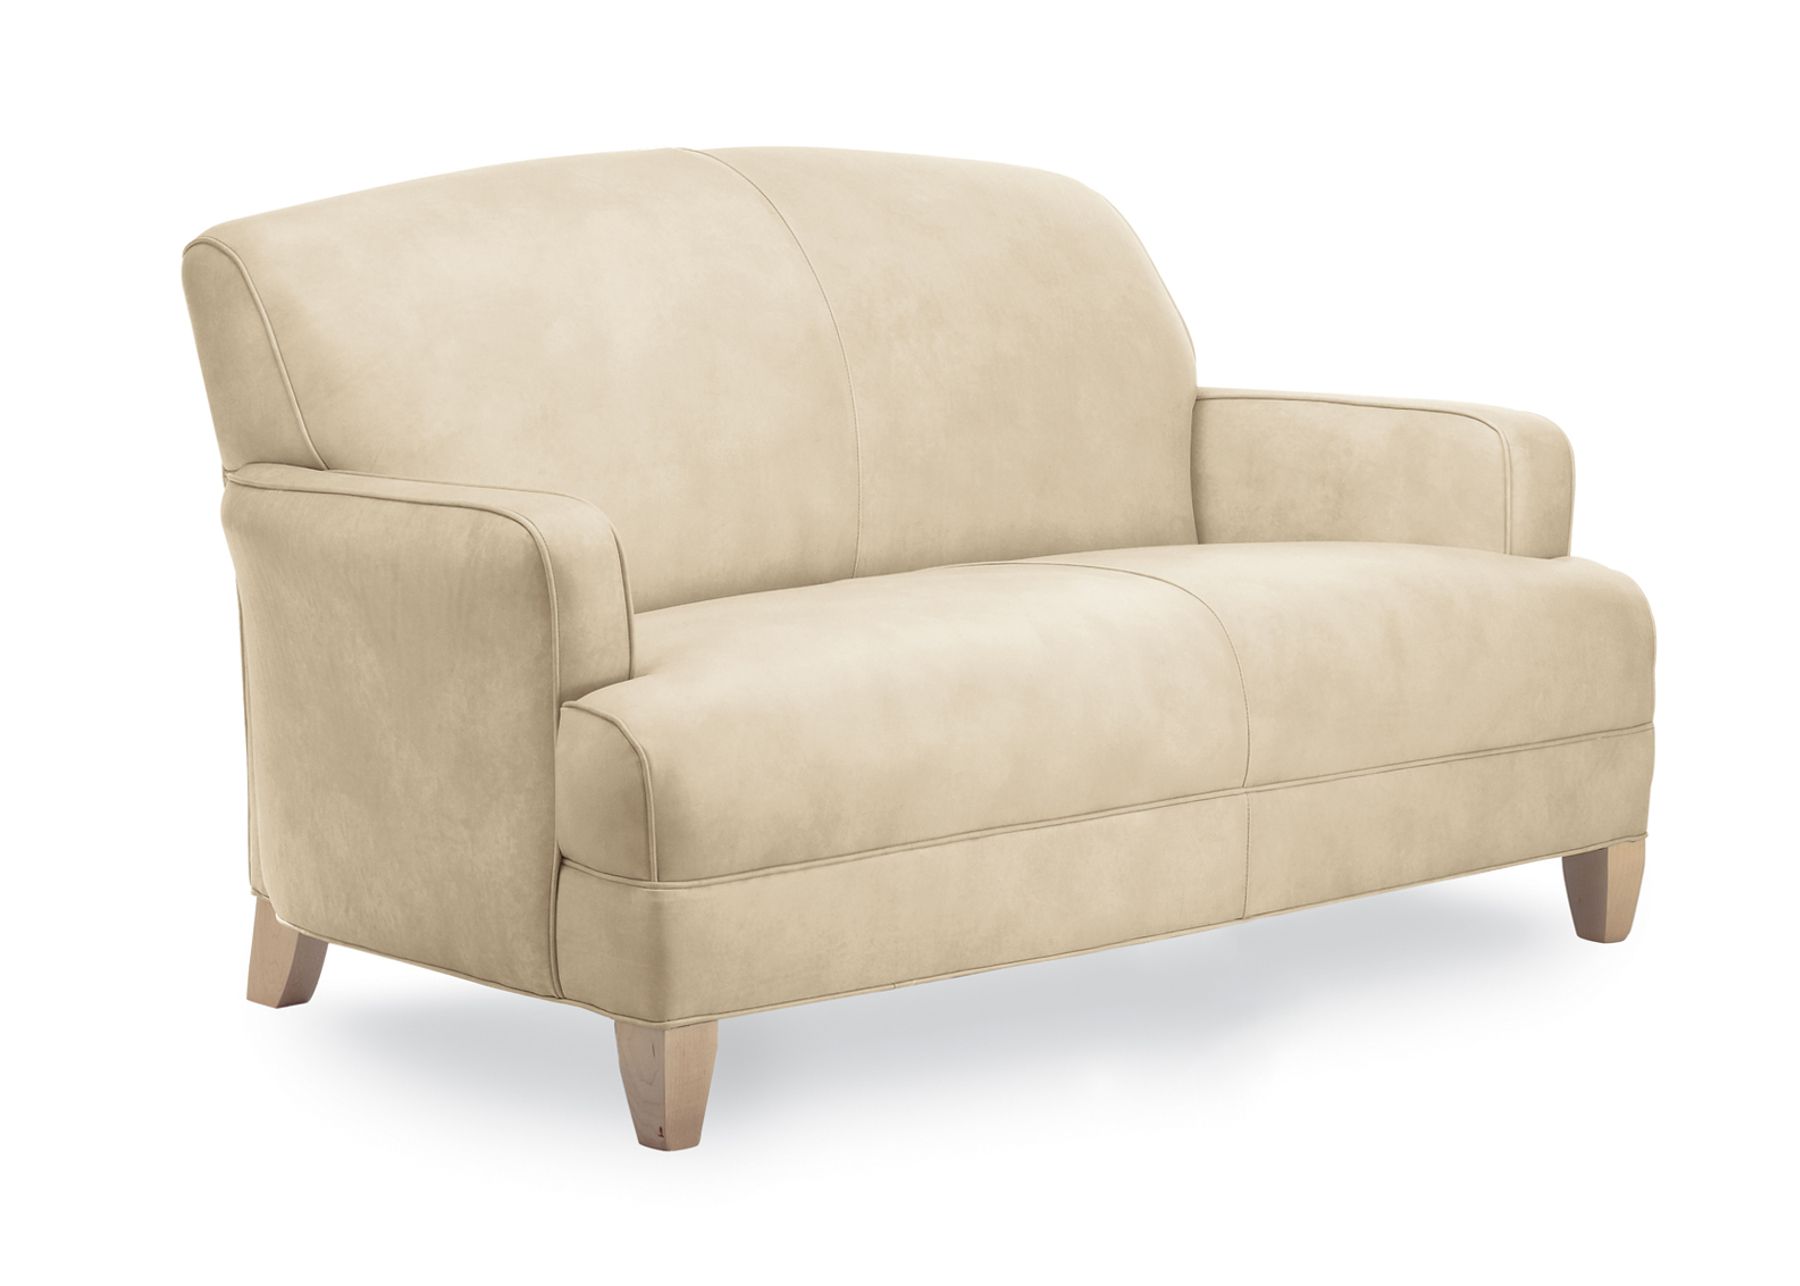  KENNET TWO-SEAT SOFA